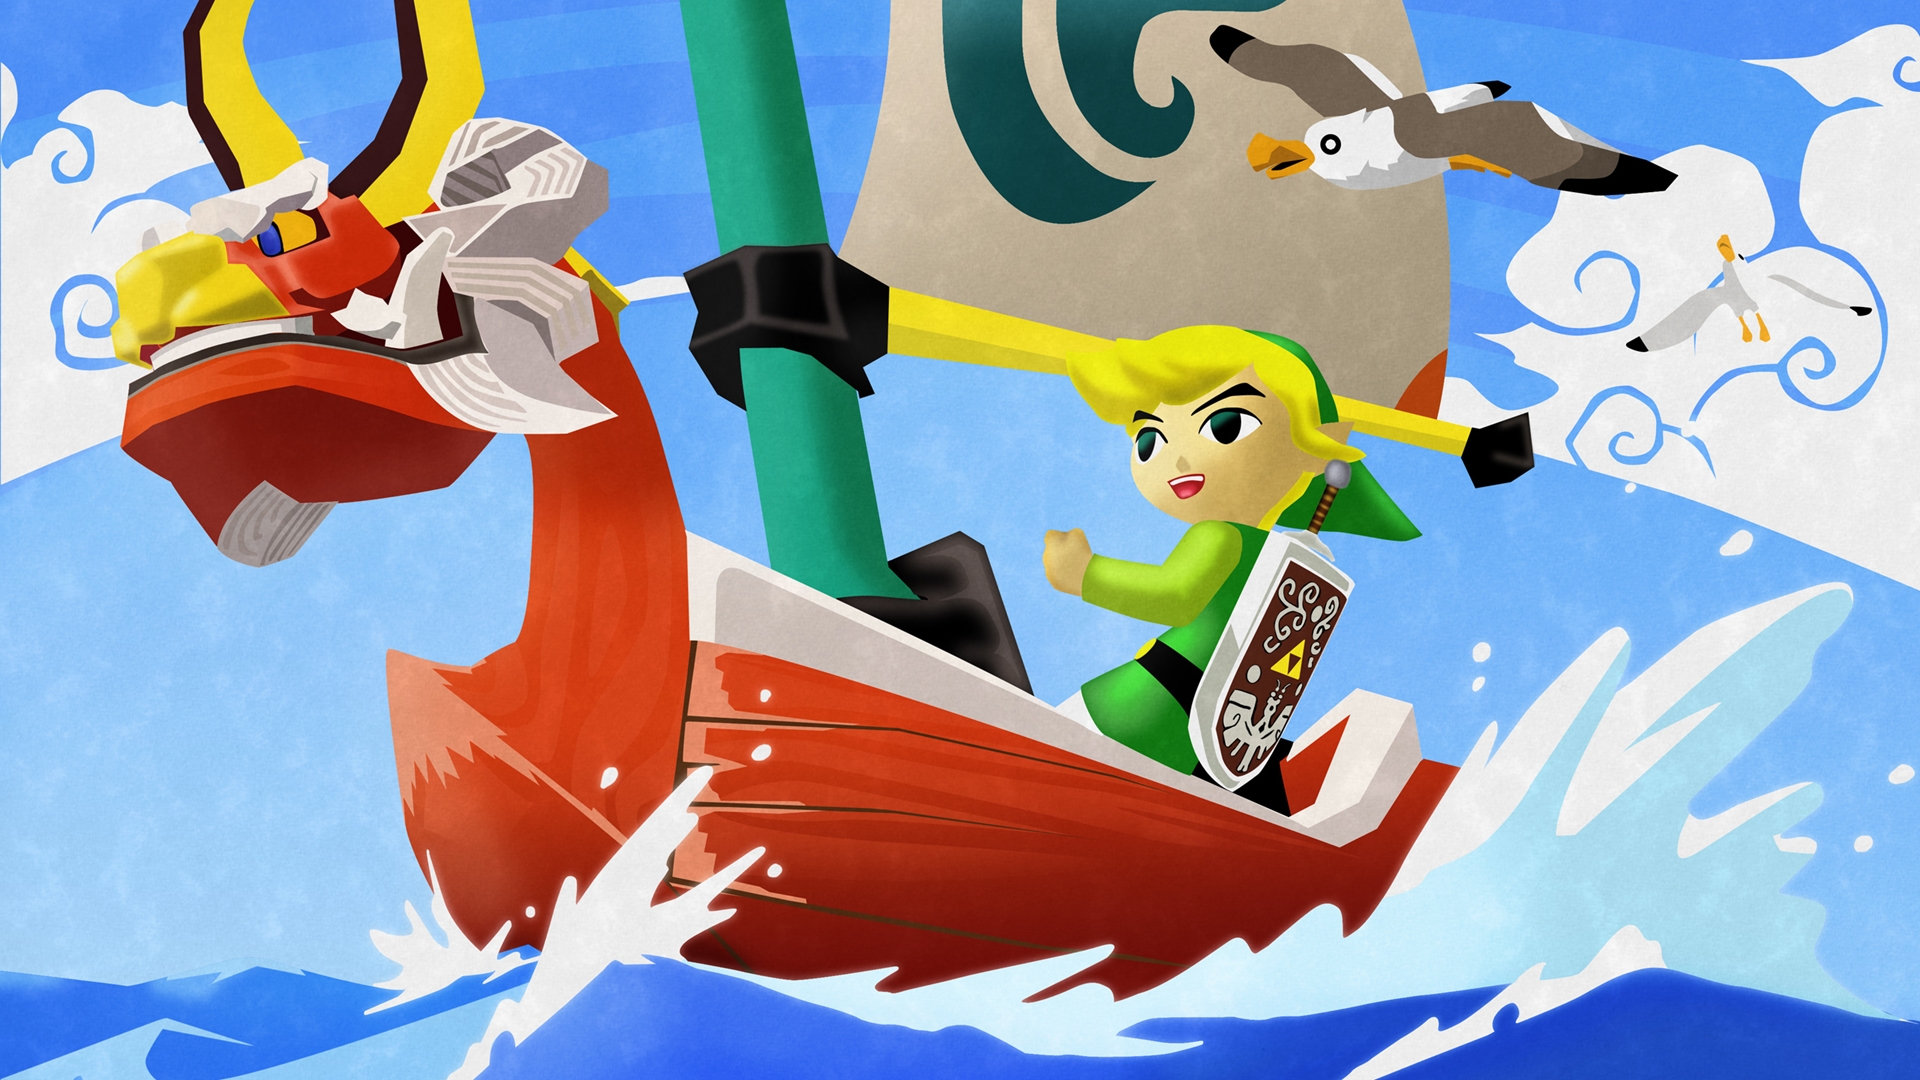 Video Game The Legend of Zelda: The Wind Waker HD Wallpaper | Background Image